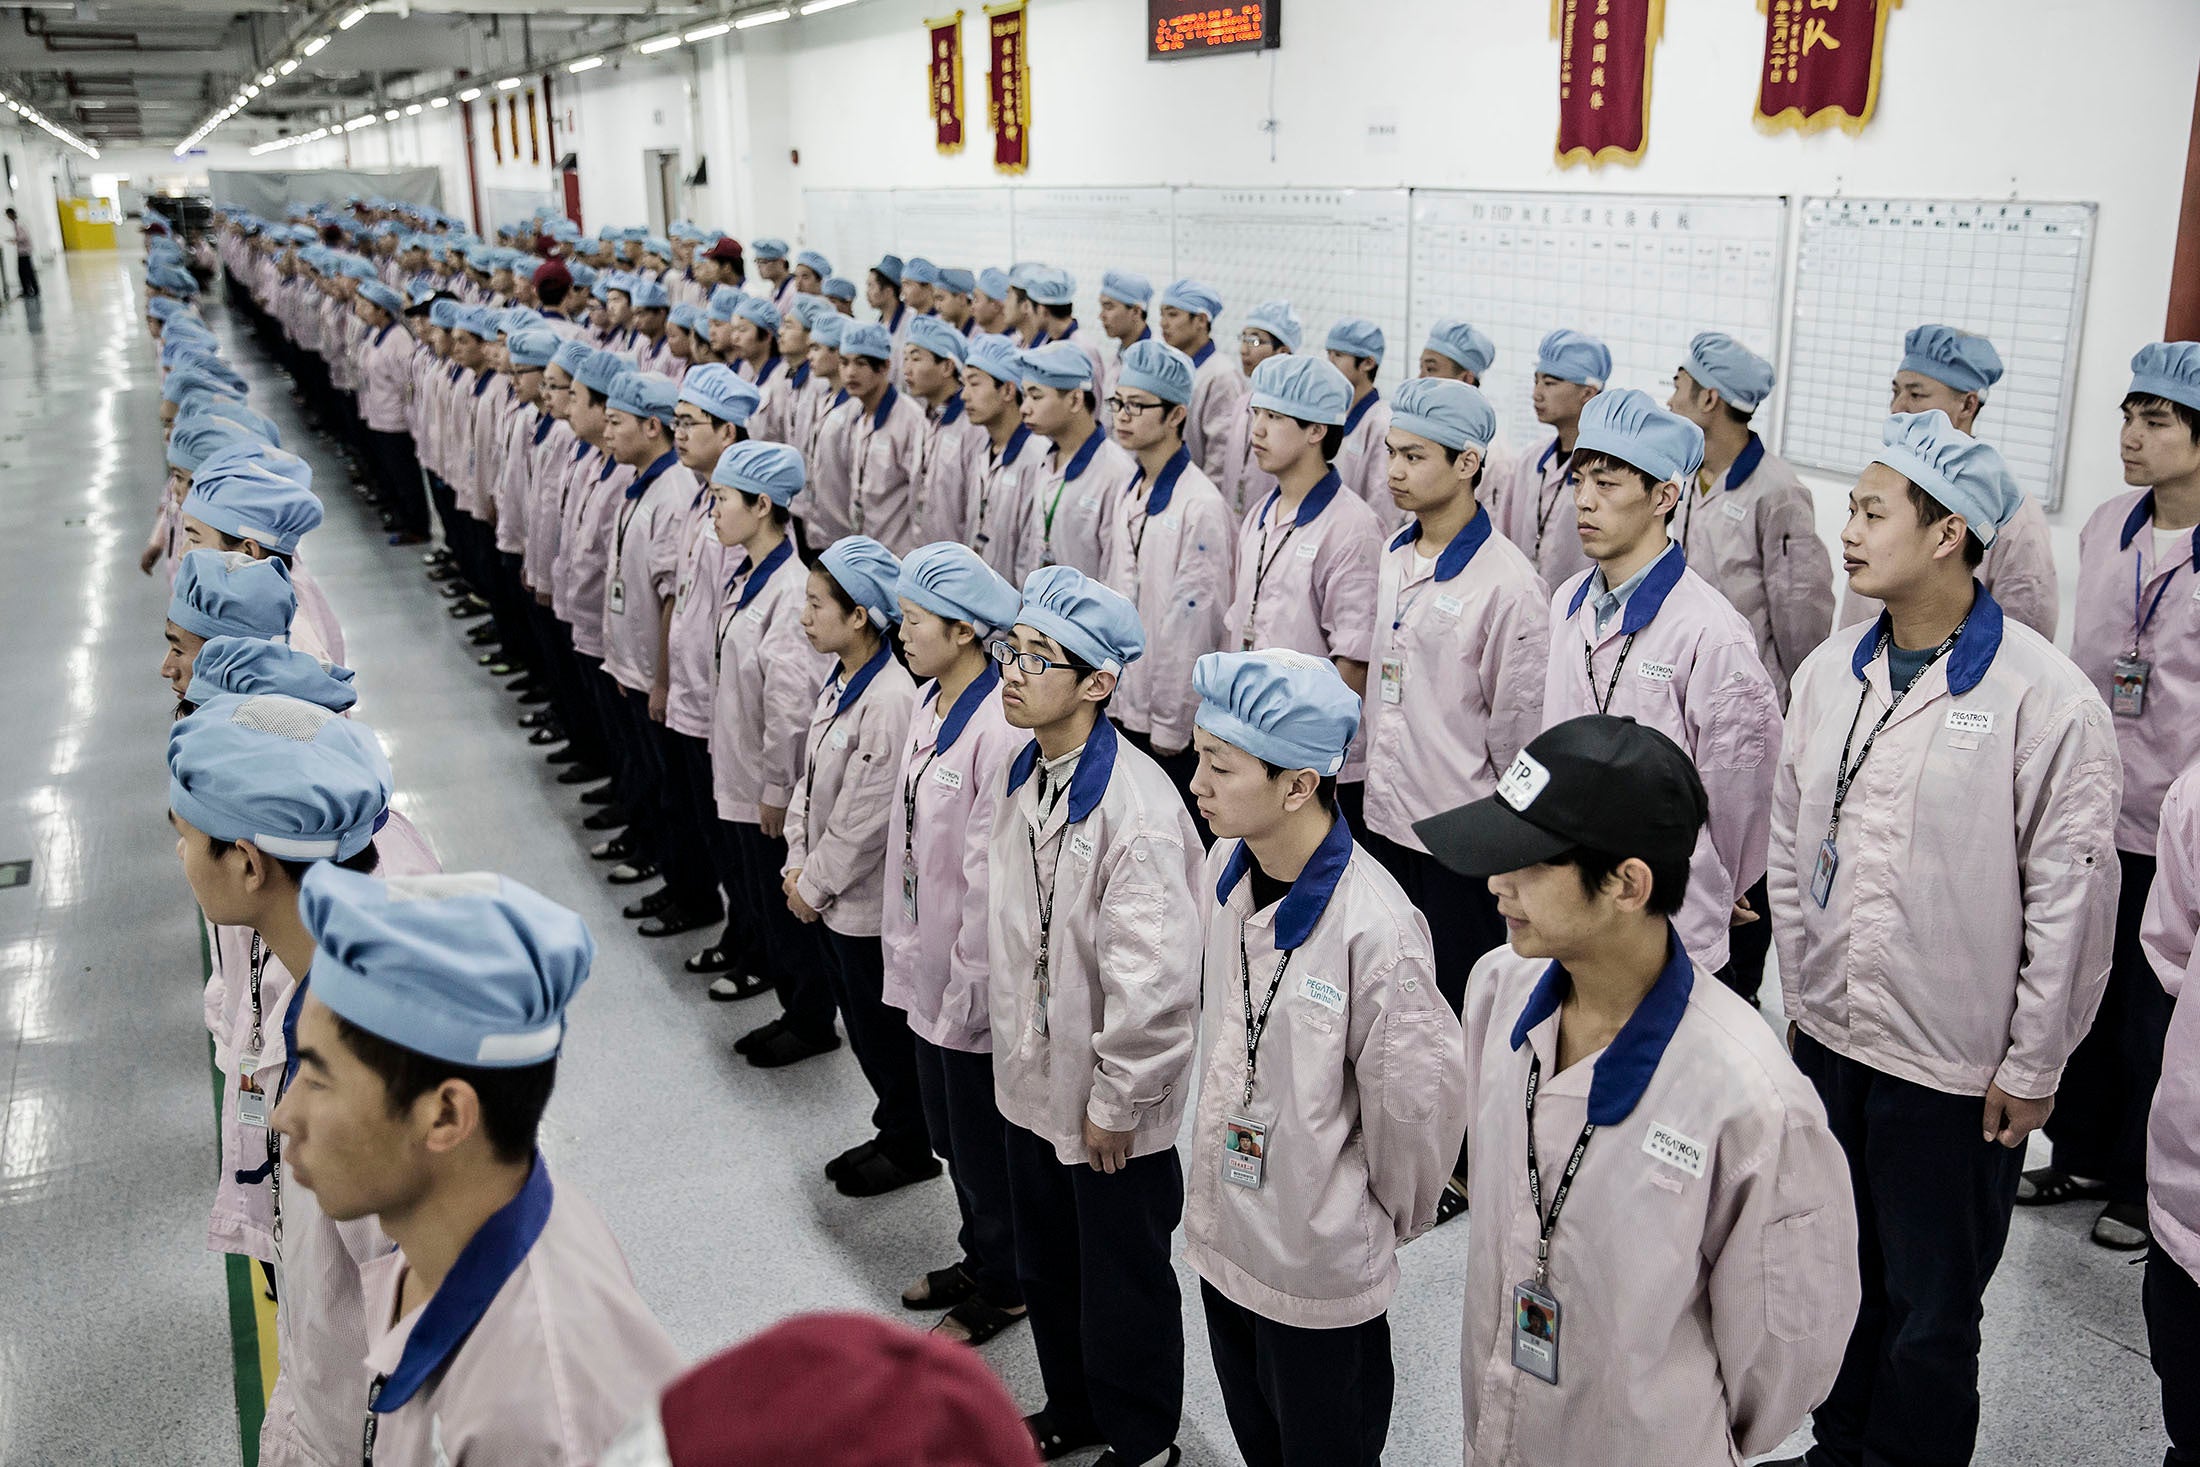 Pegatron assembly workers line up before knocking out a 10-12 hour shift putting together iPhones. Such a scene is not so viable in the US. Photo credit - Bloomberg - Apple making iPhones in the United States? Do not hold your breath